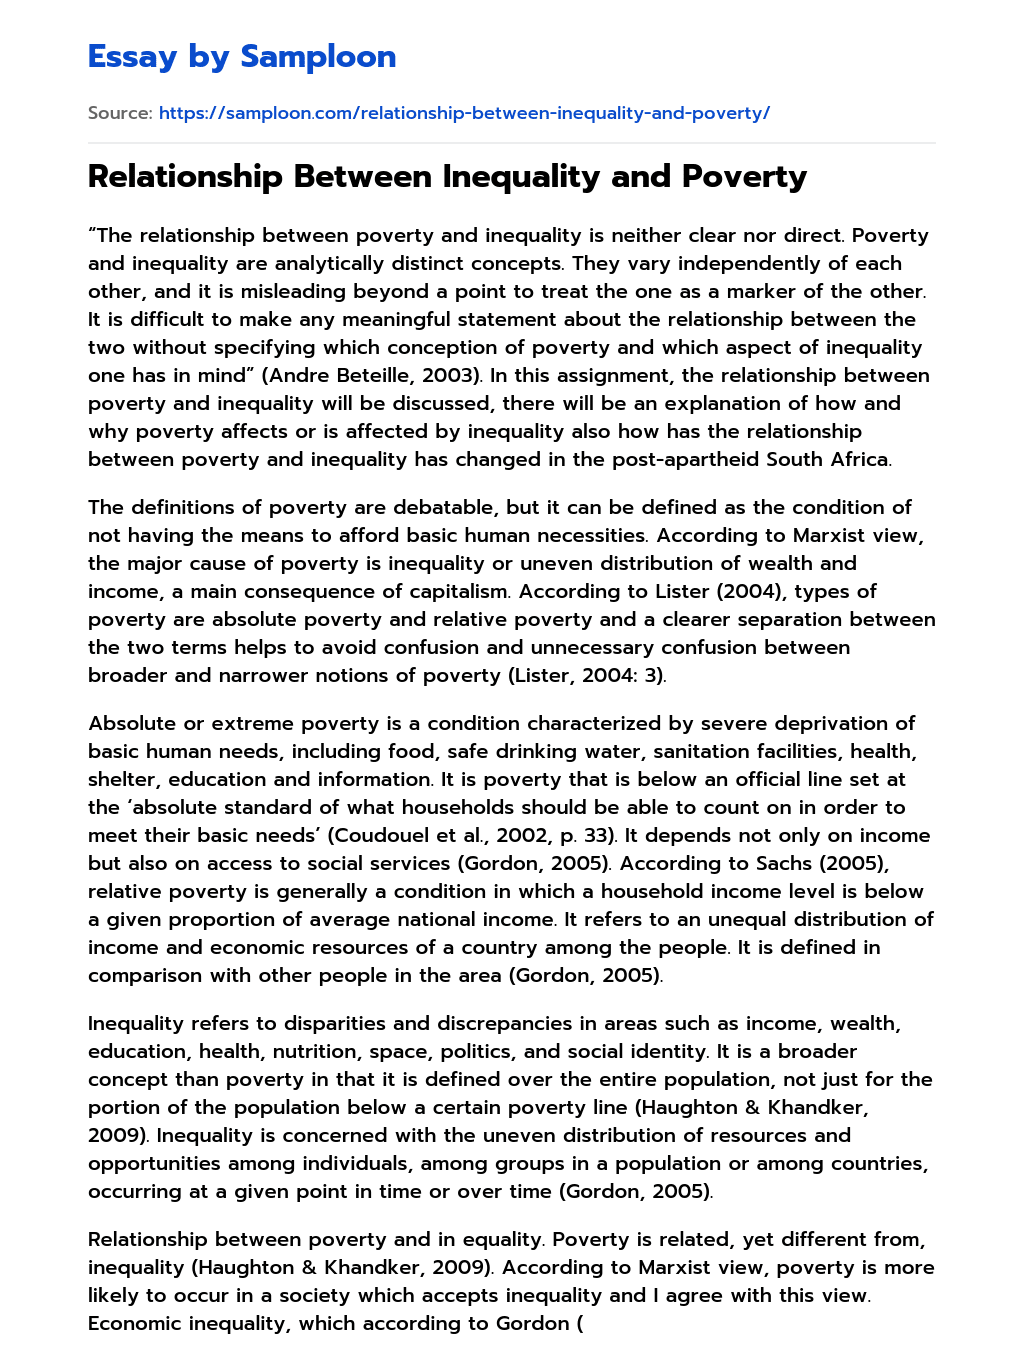 Relationship Between Inequality and Poverty essay